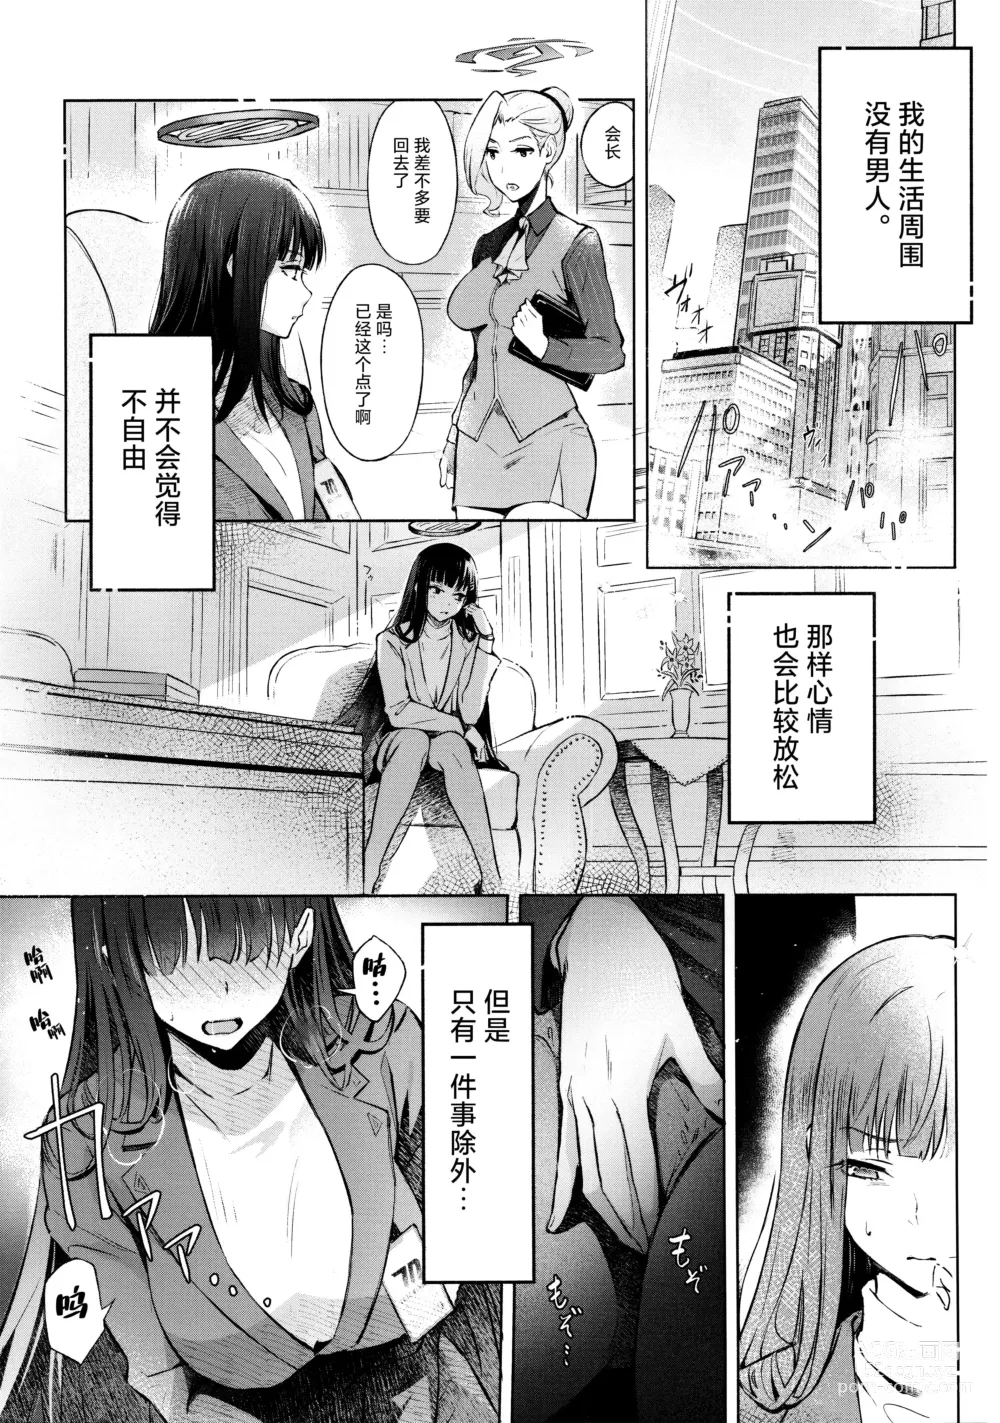 Page 4 of doujinshi 会长亲之恋